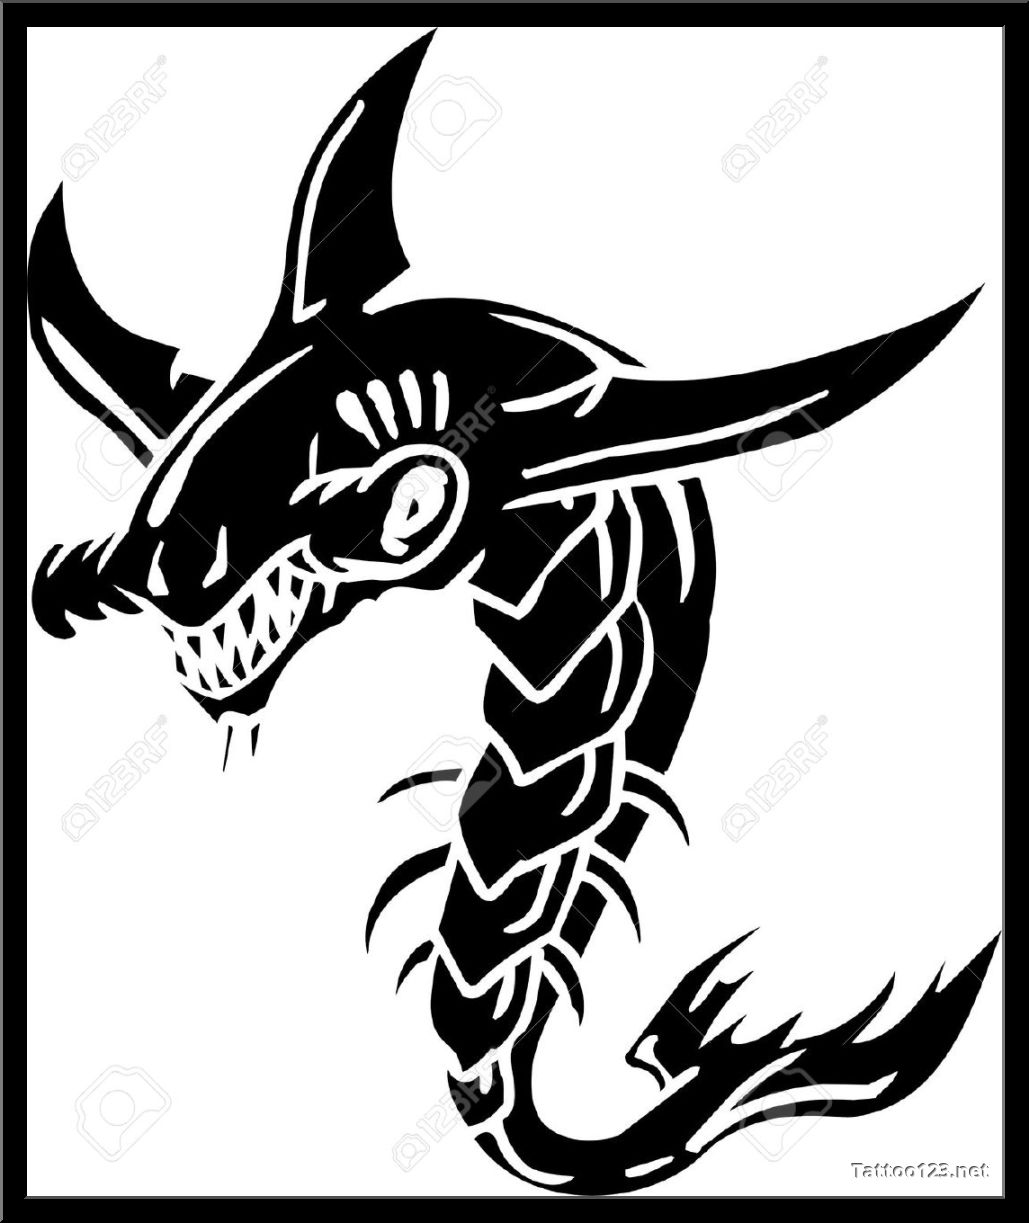 Awesome Black Ink Angry Sea Creature Tattoo Stencil